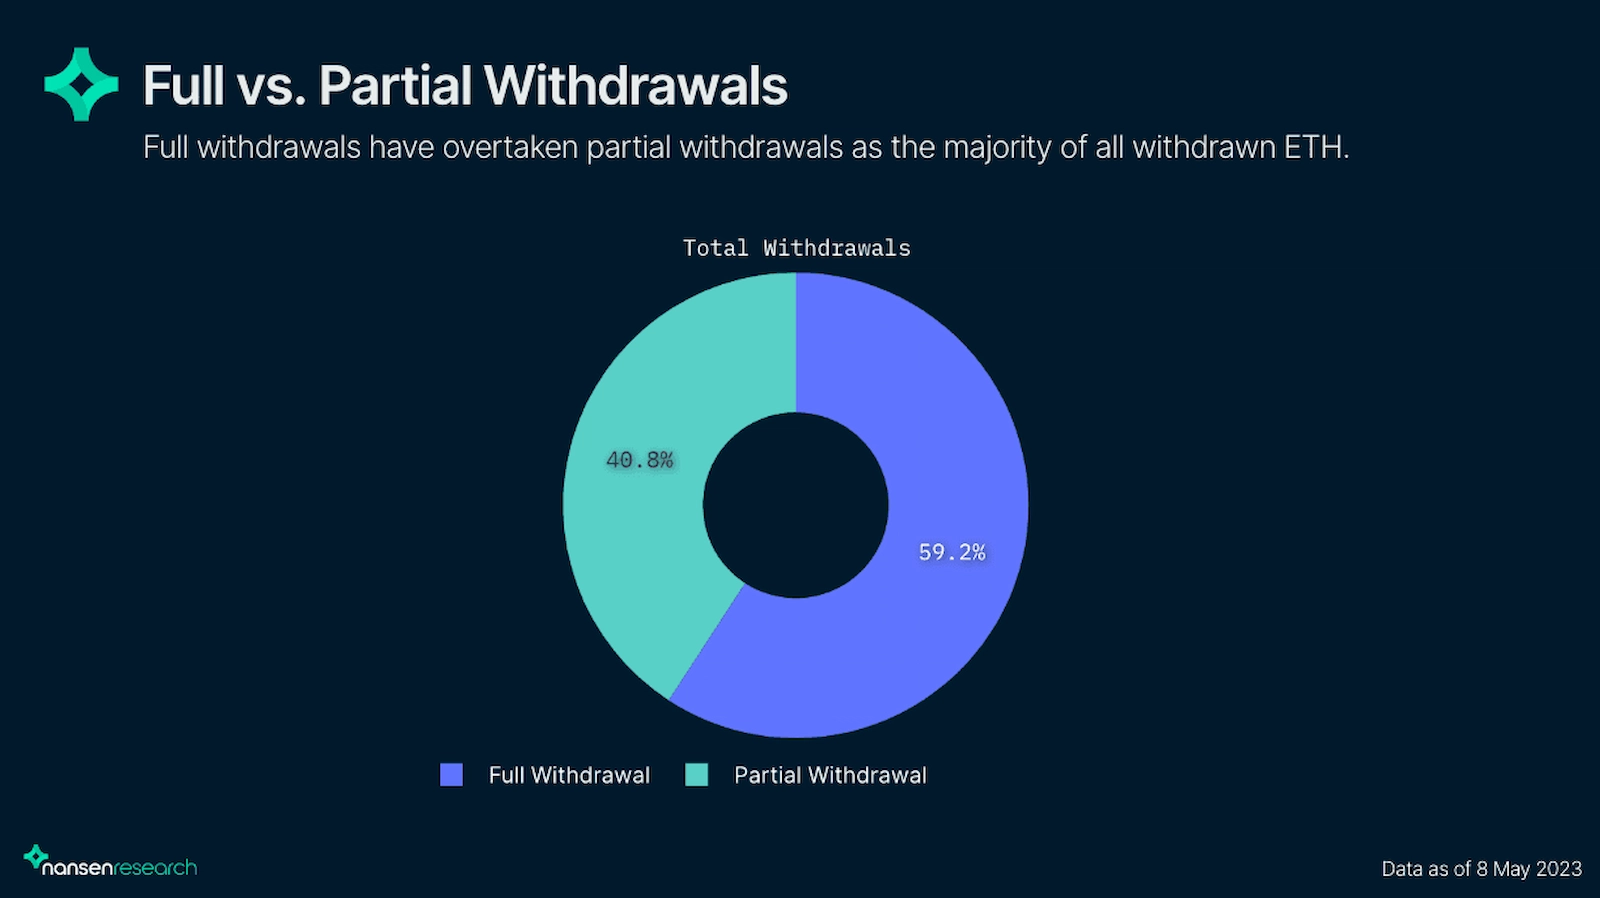 Full withdrawals have overtaken partial withdrawals post the Ethereum Shanghai update